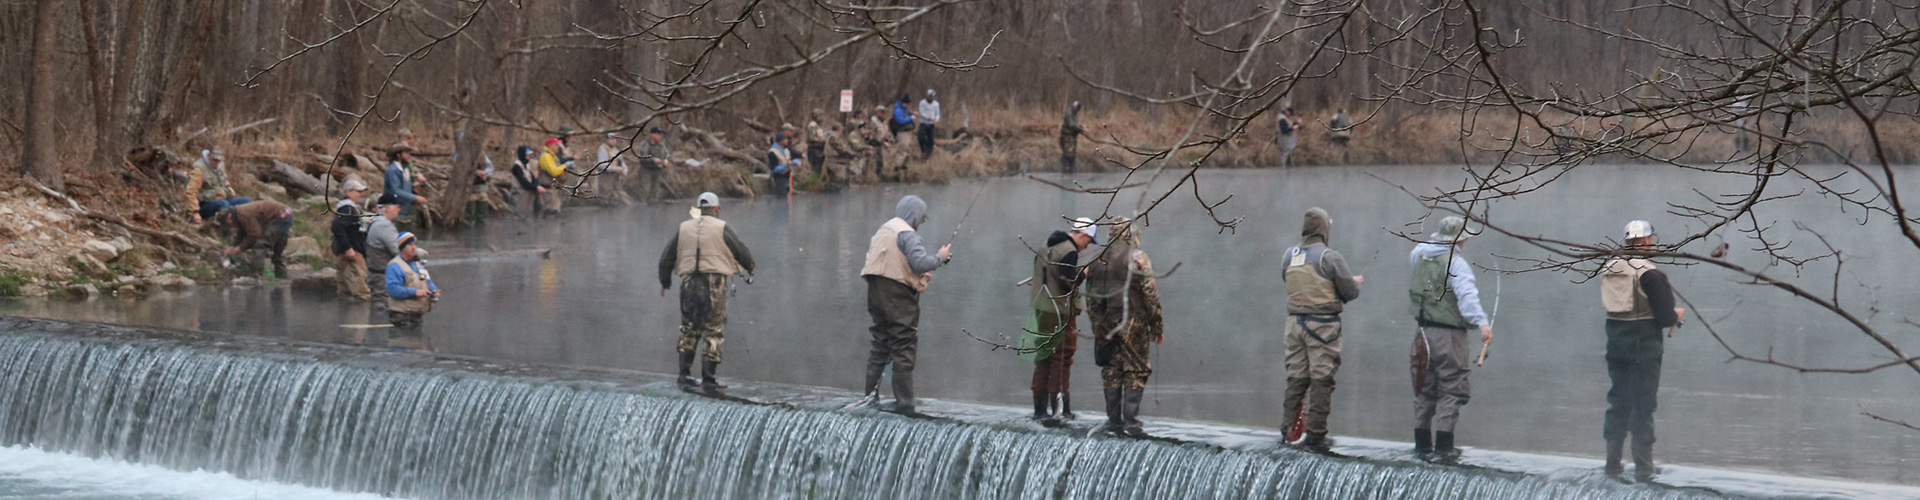 Fisherman on opening of trout season in Montauk State Park